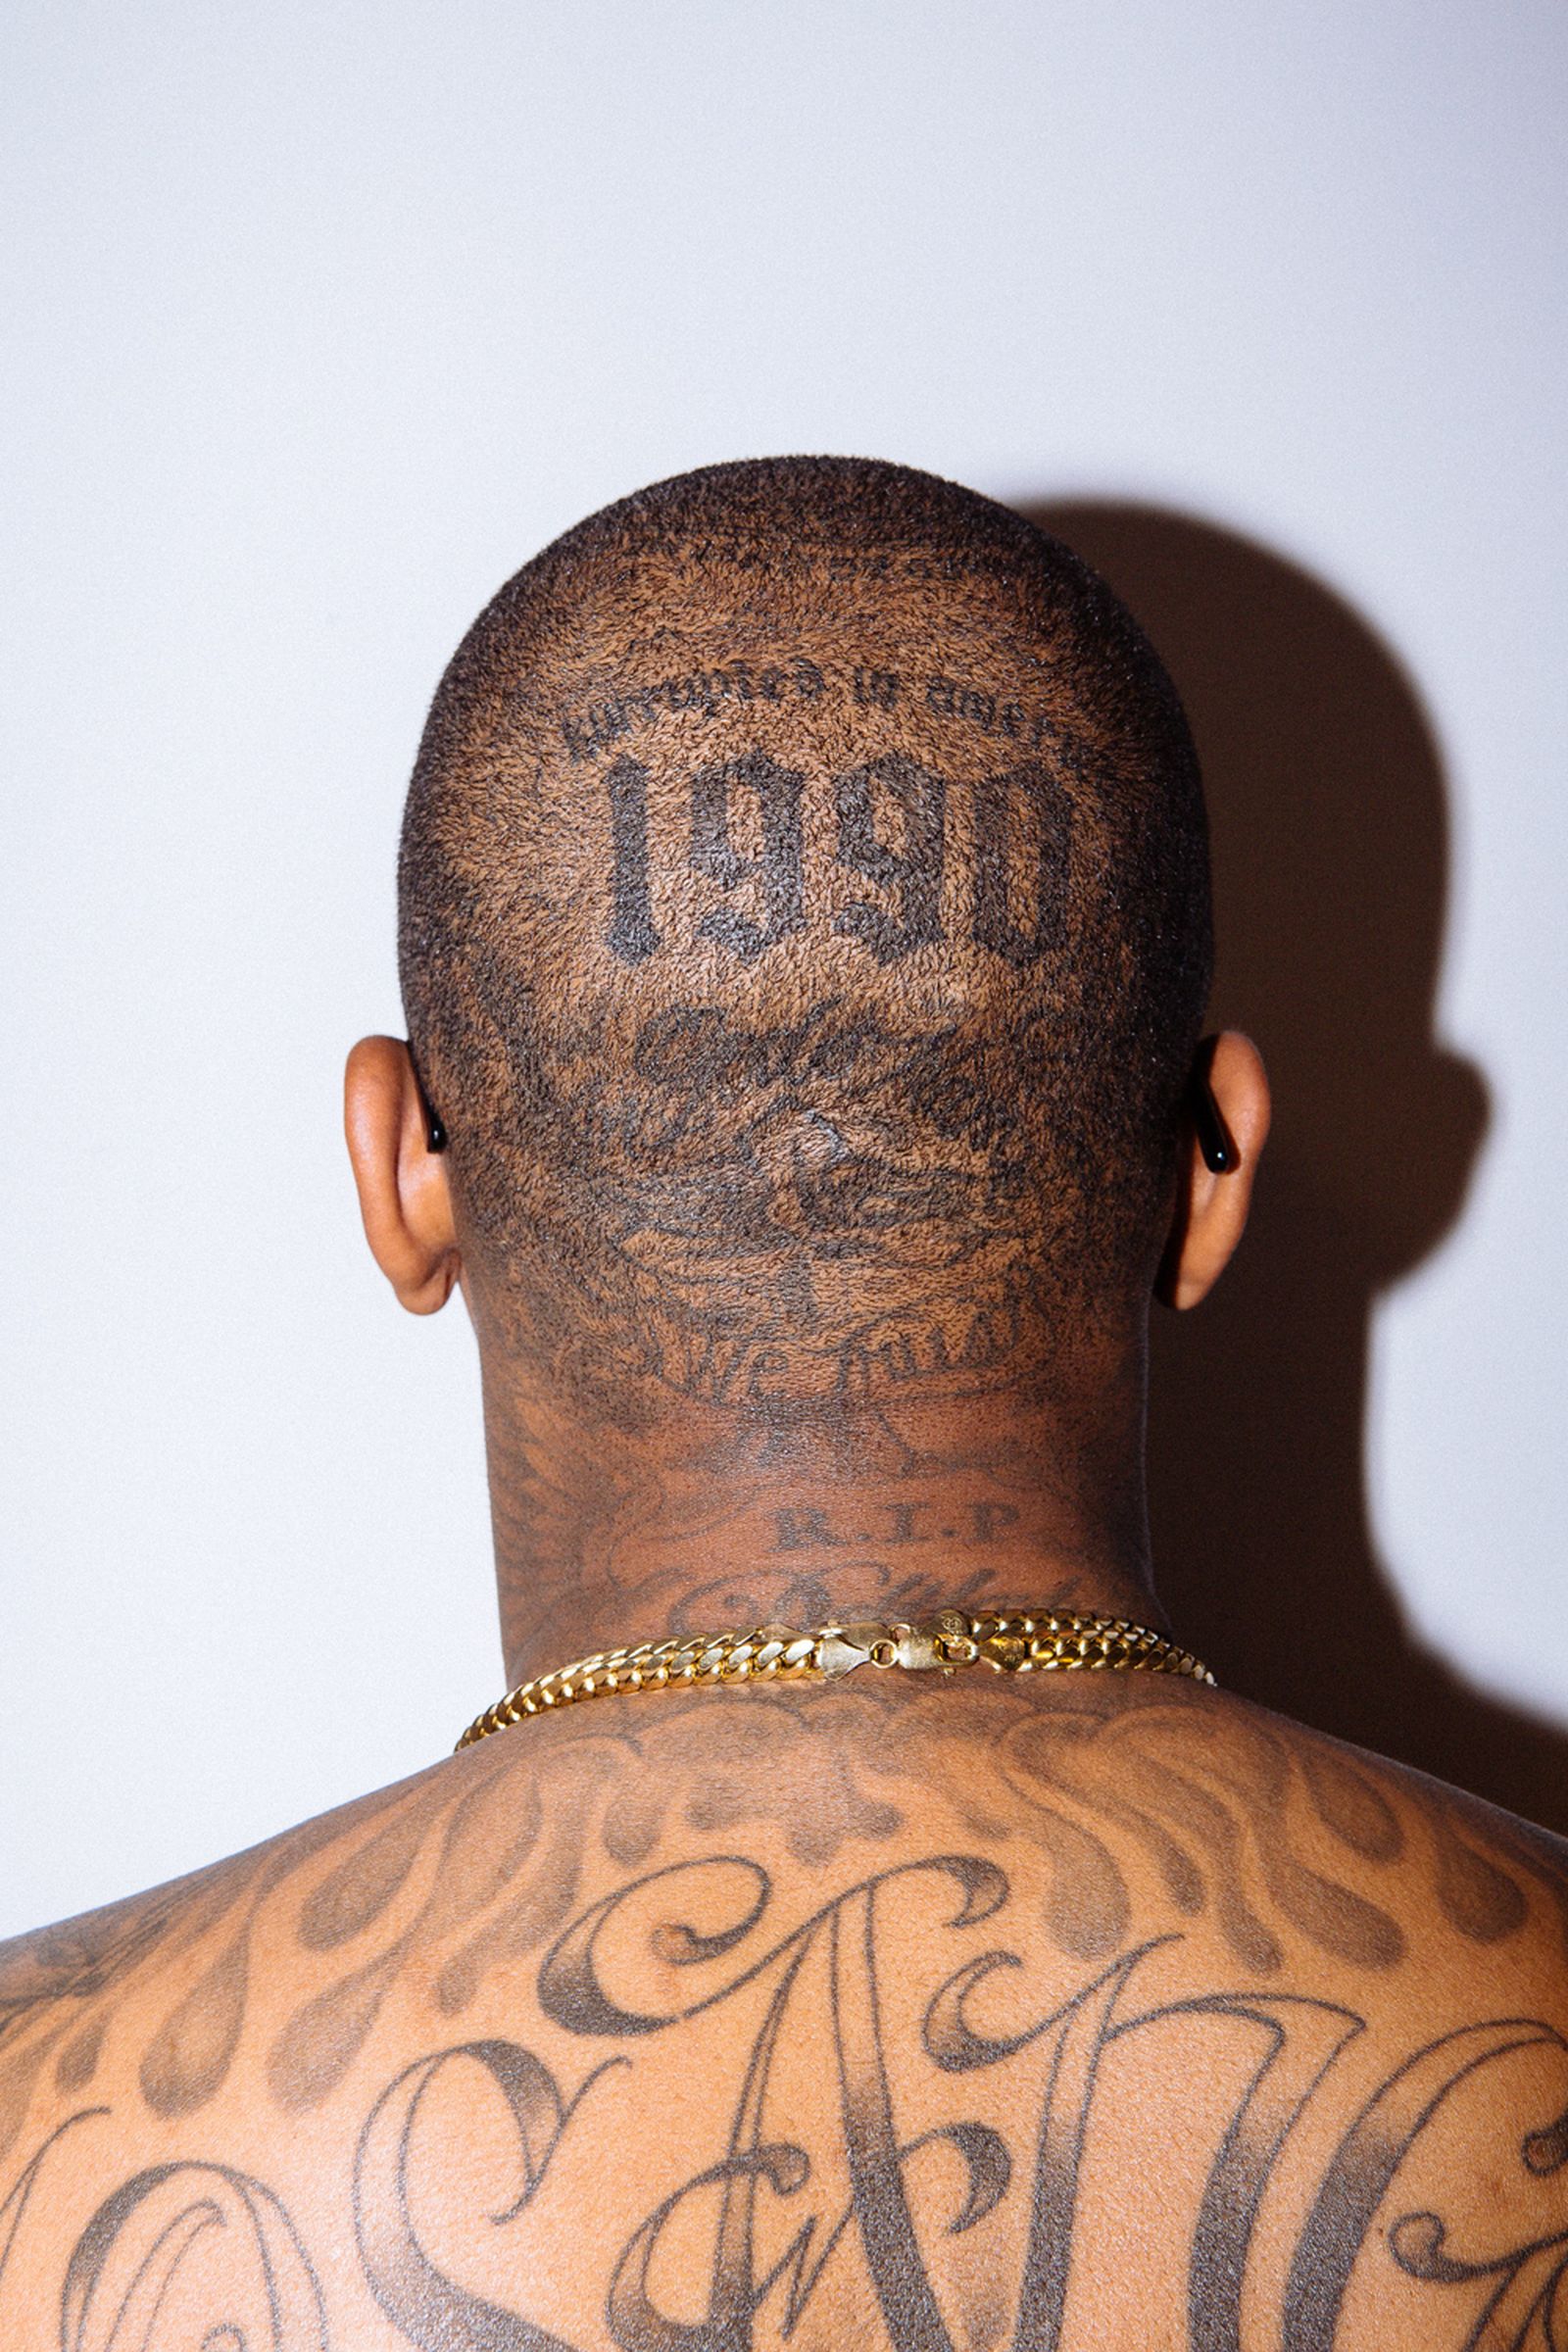 YG Shares the Stories Behind His Most Treasured Tattoos